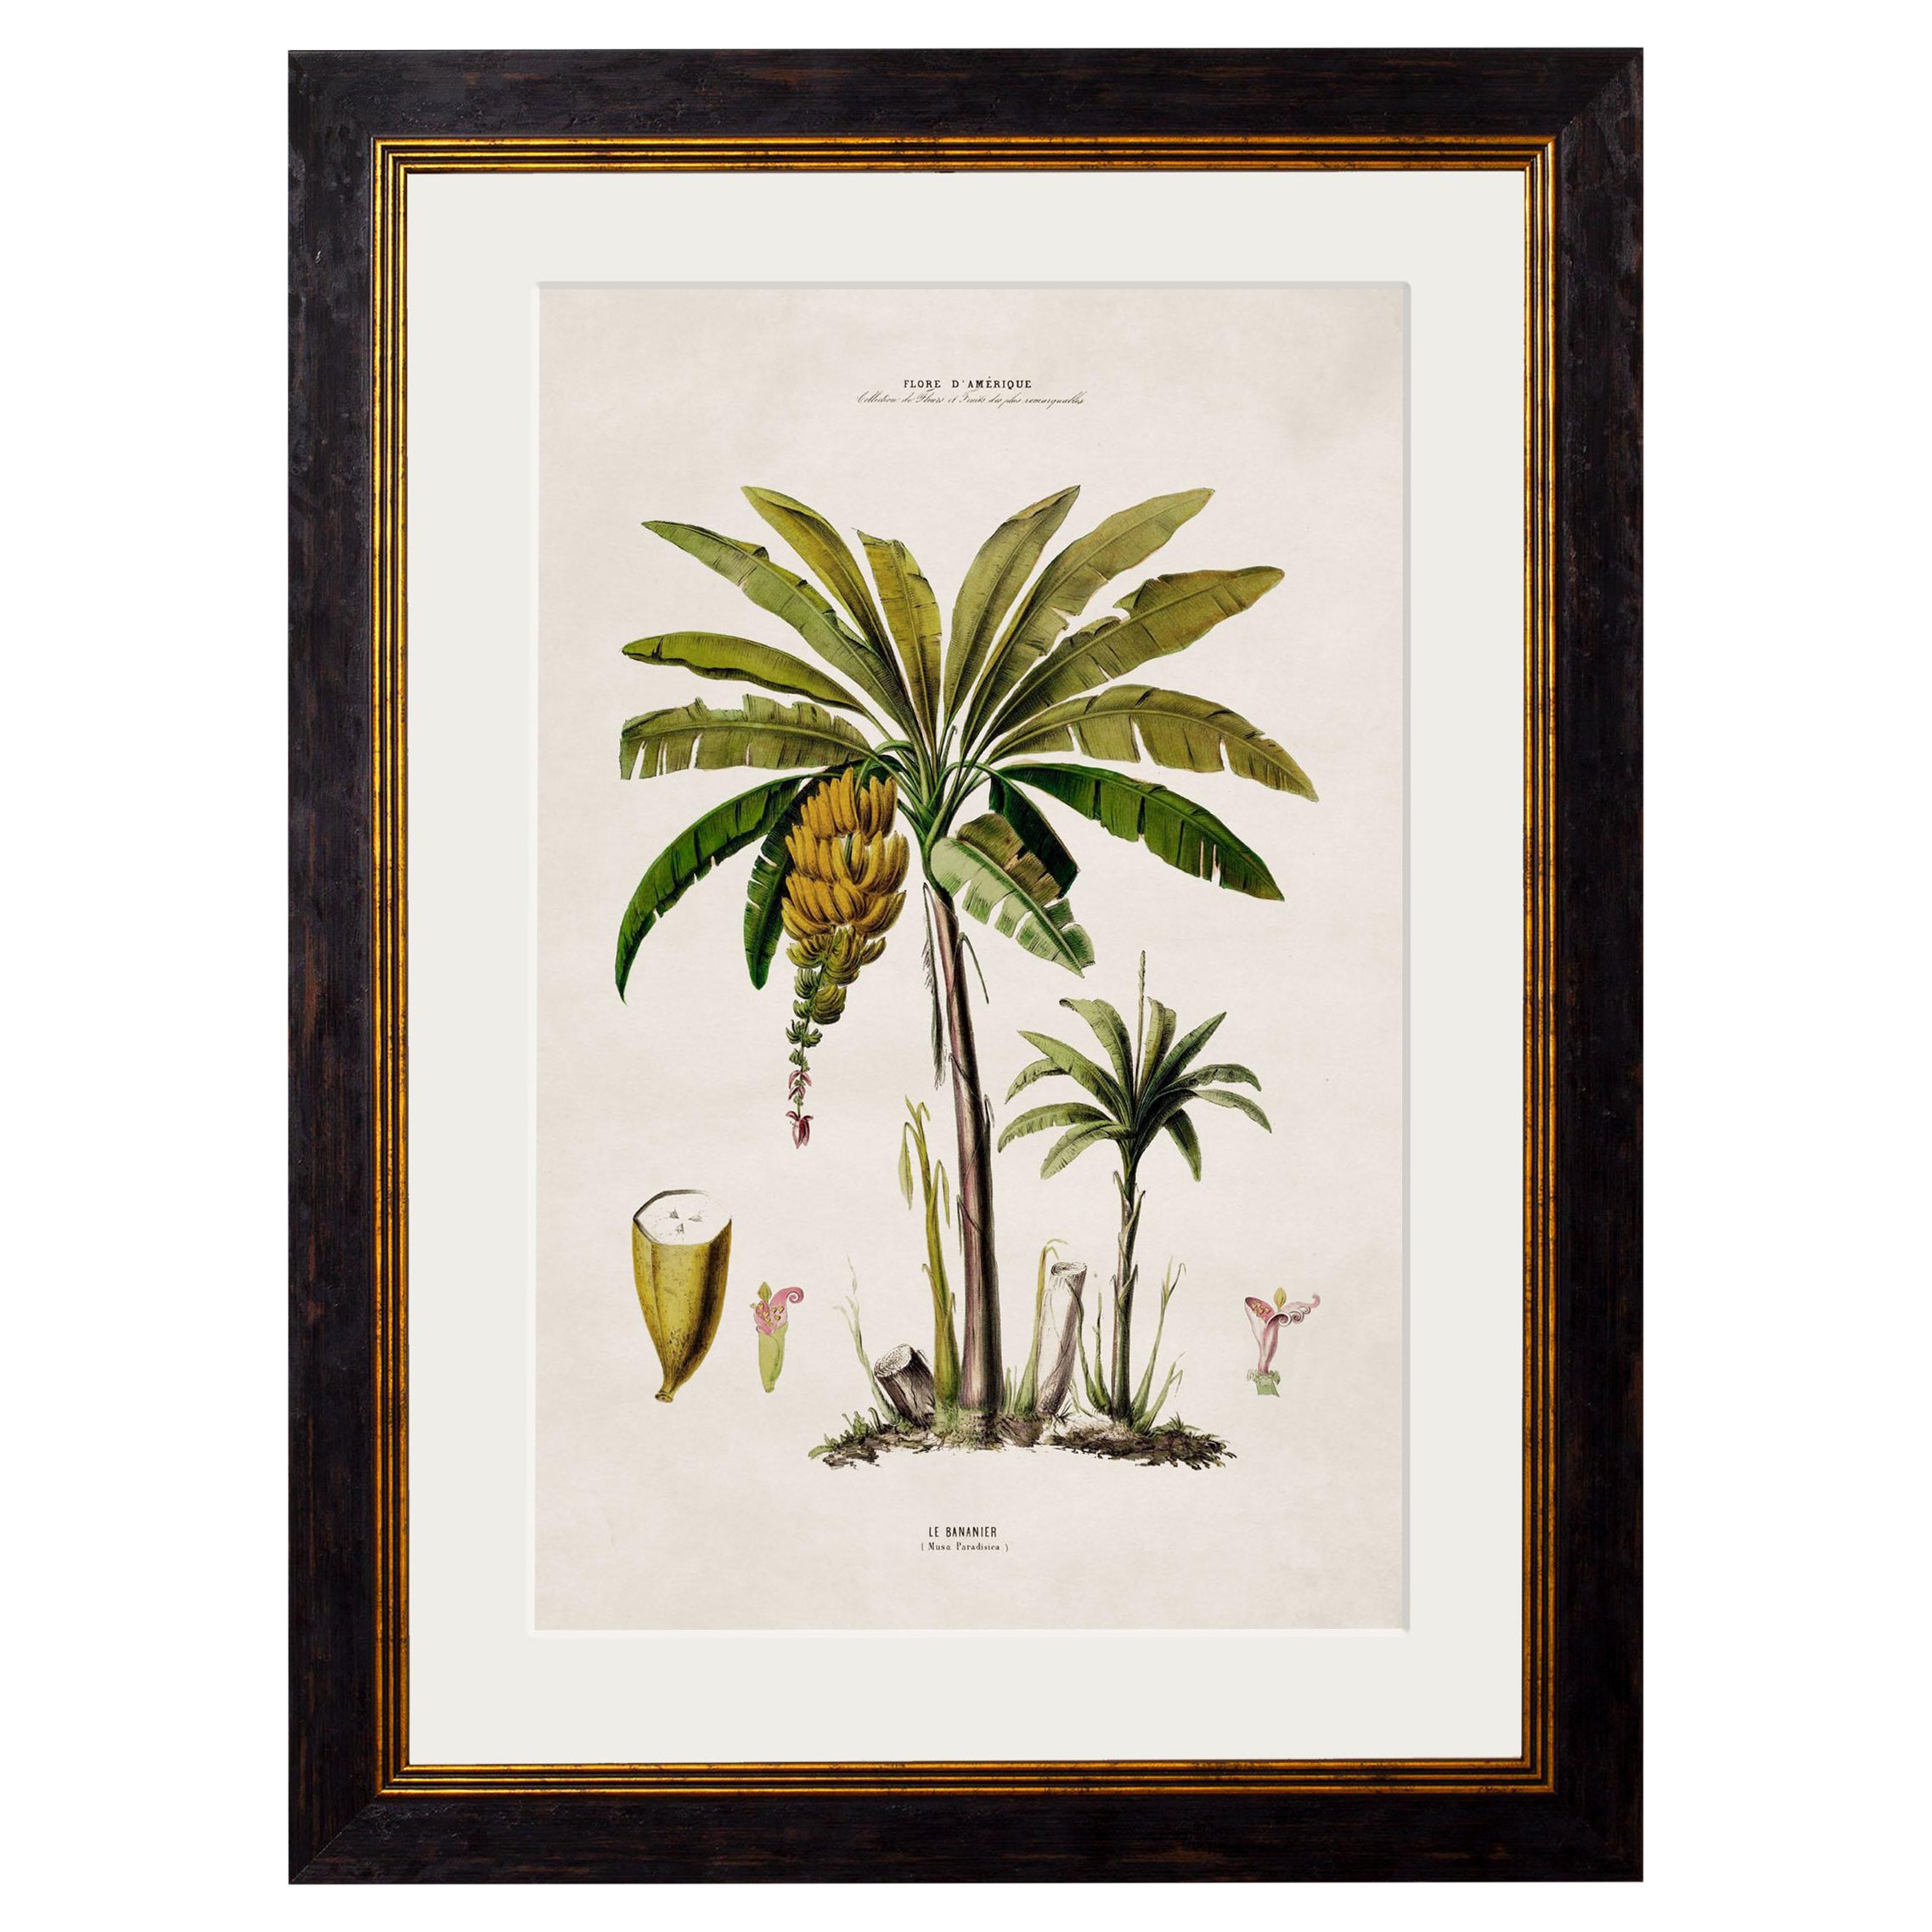 South American Banana Palm Tree Framed Print from C 1843 Study, New